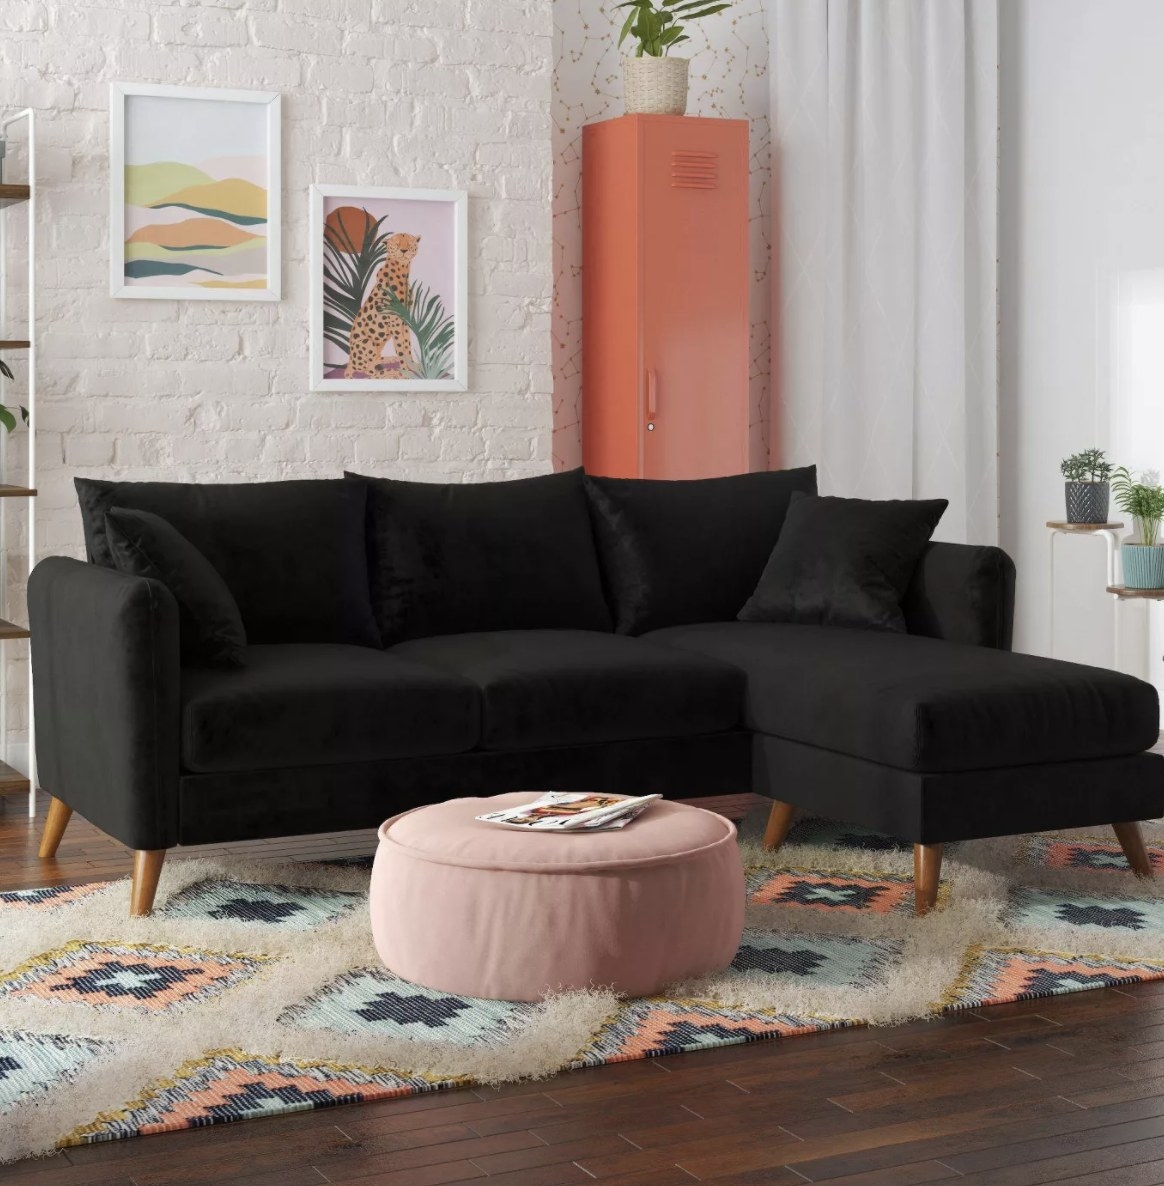 The black sofa has an L shape and five pillows